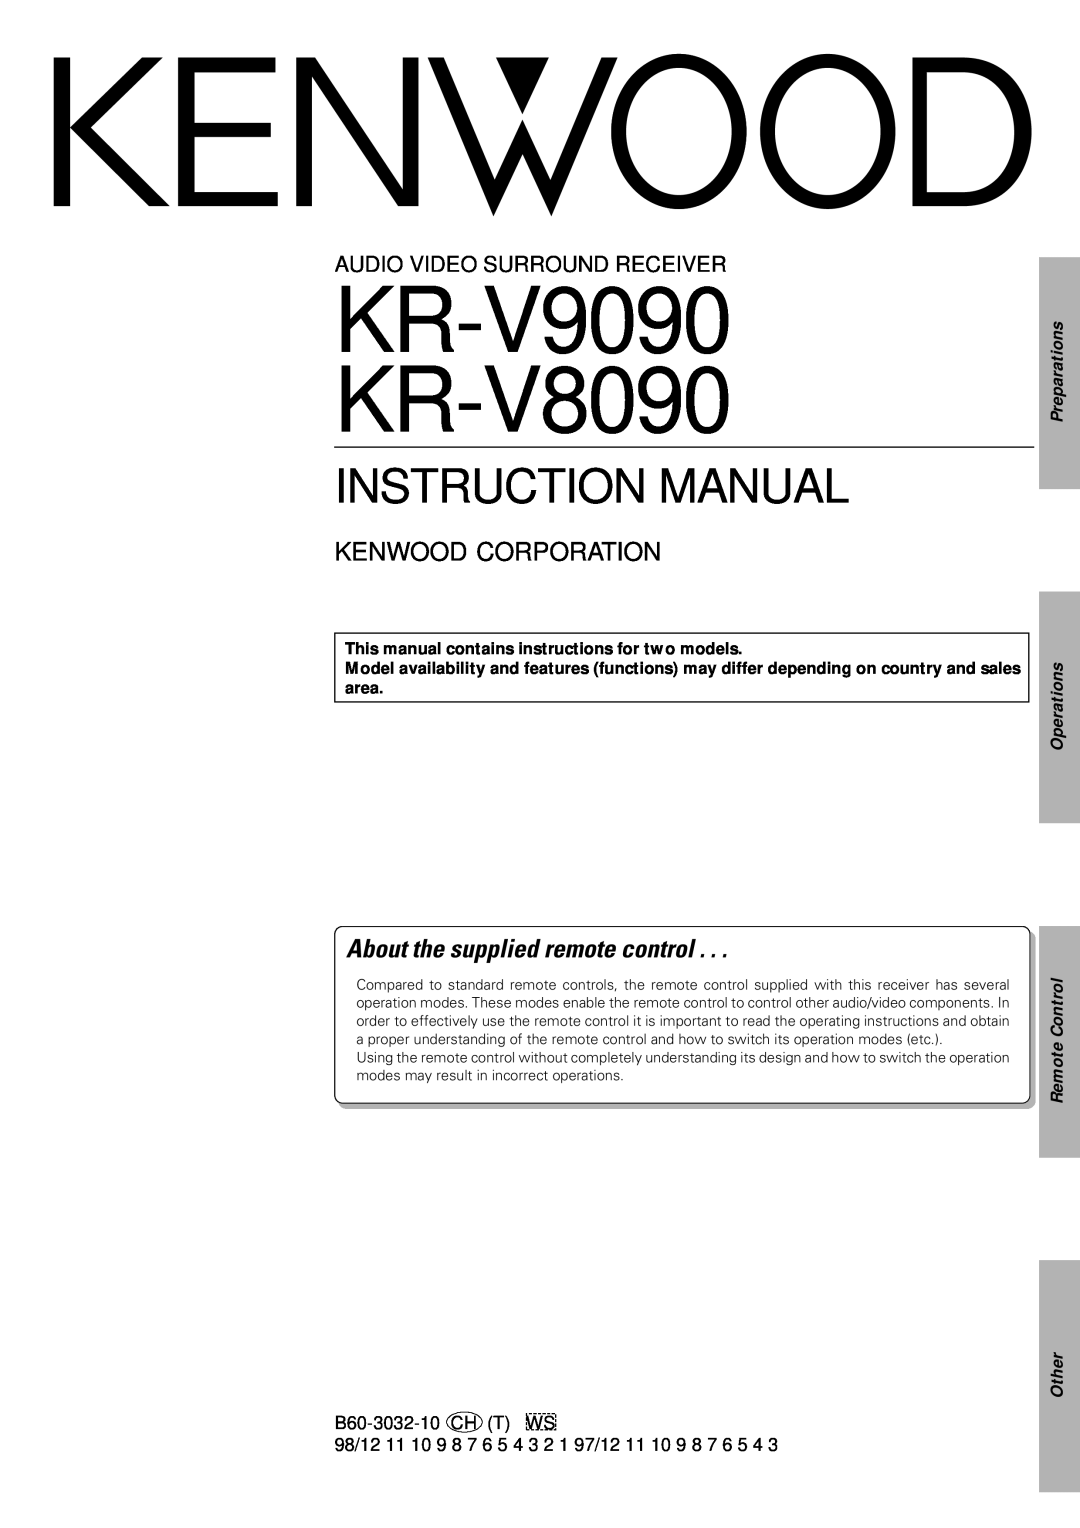 Kenwood KR-V8090 instruction manual About the supplied remote control, Preparations, Operations Remote Control Other 